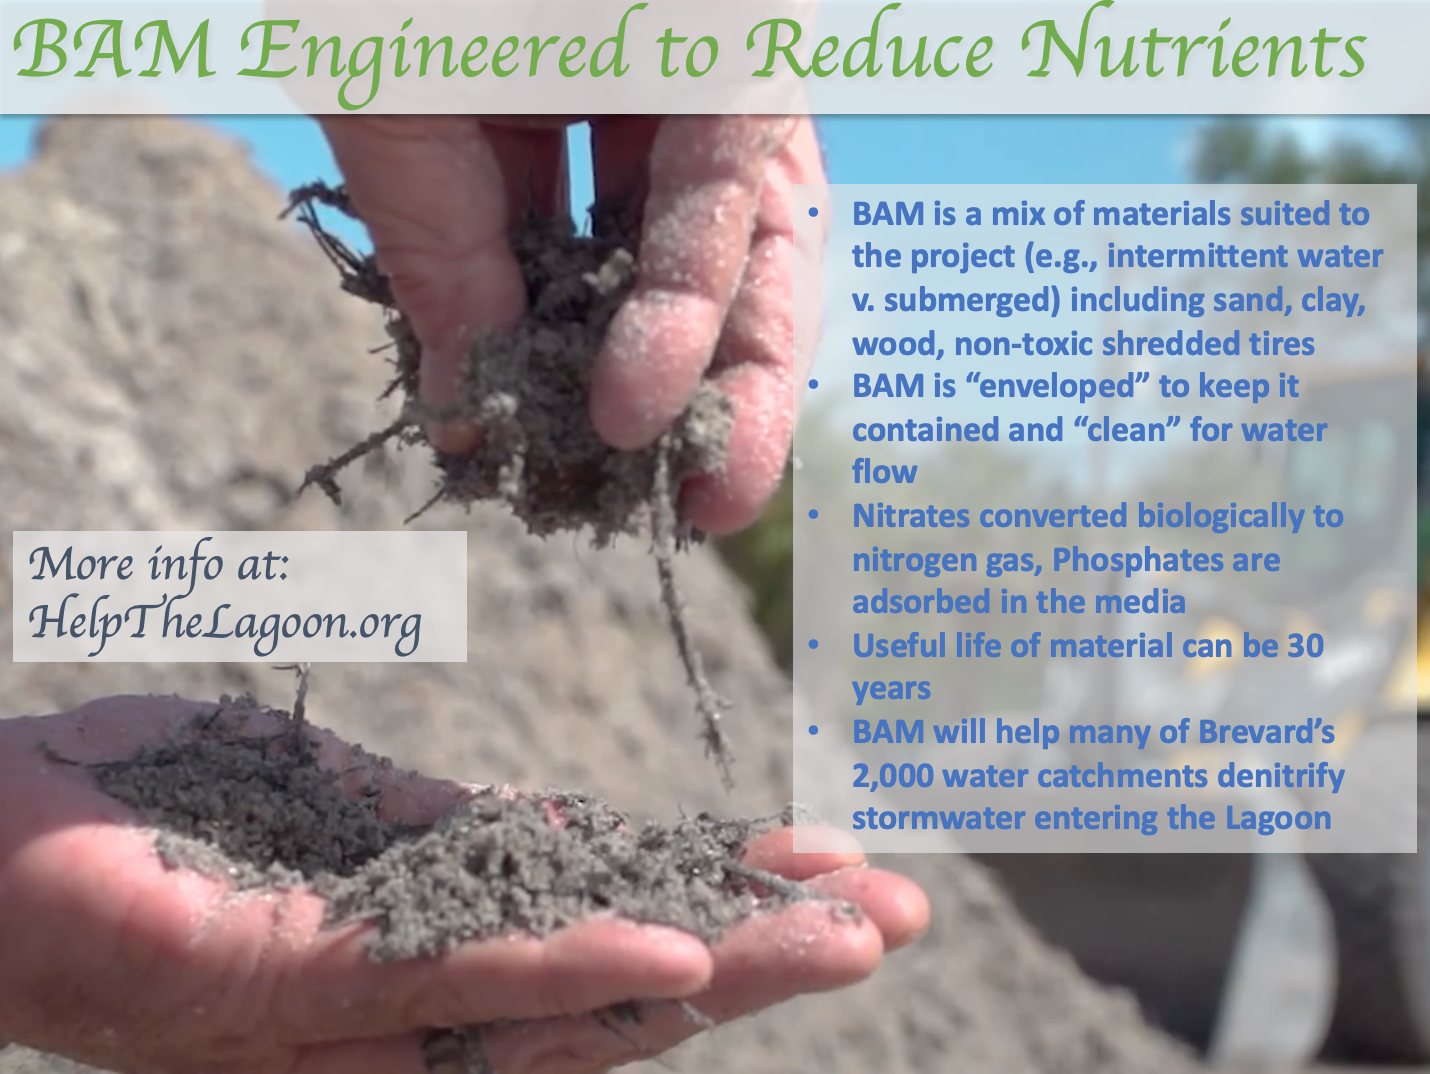 BAM engineered to reduce Nutrients